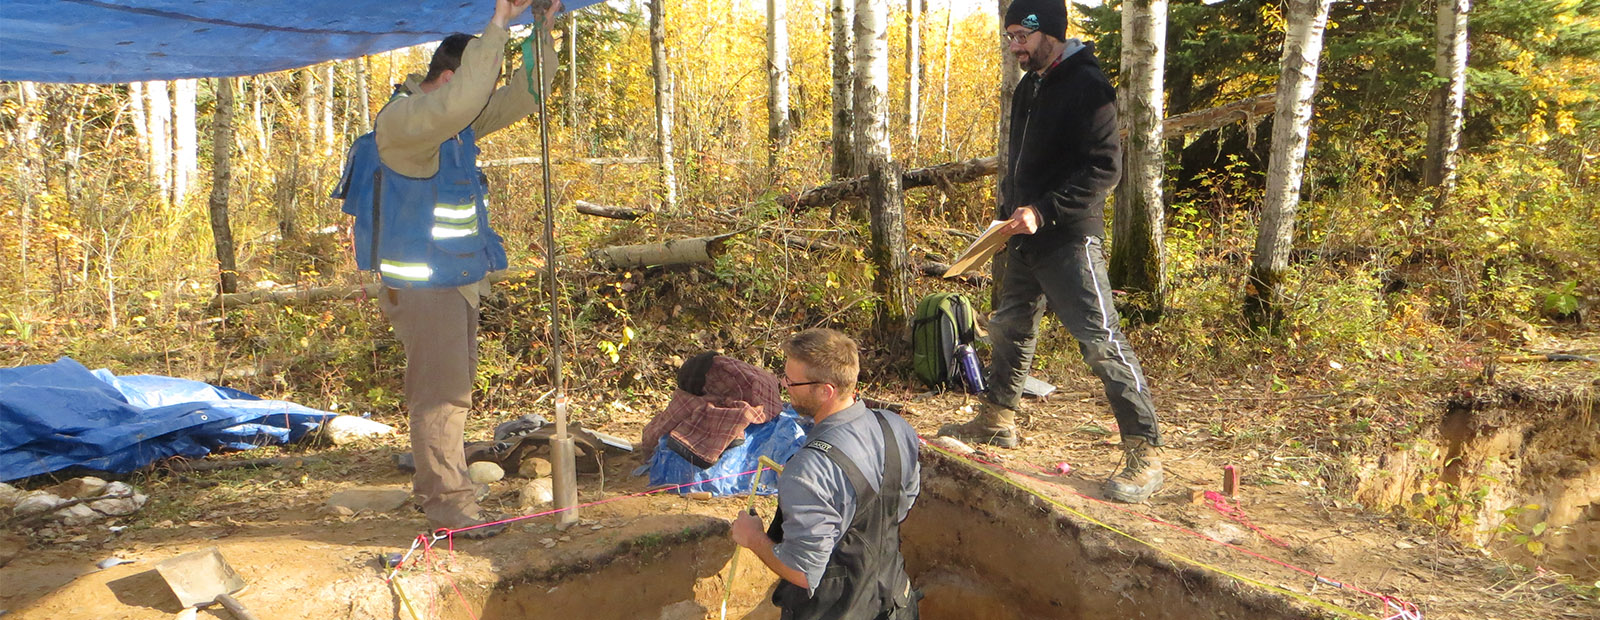 Researchers measuring and recording data at an archaeological site in northern Alberta